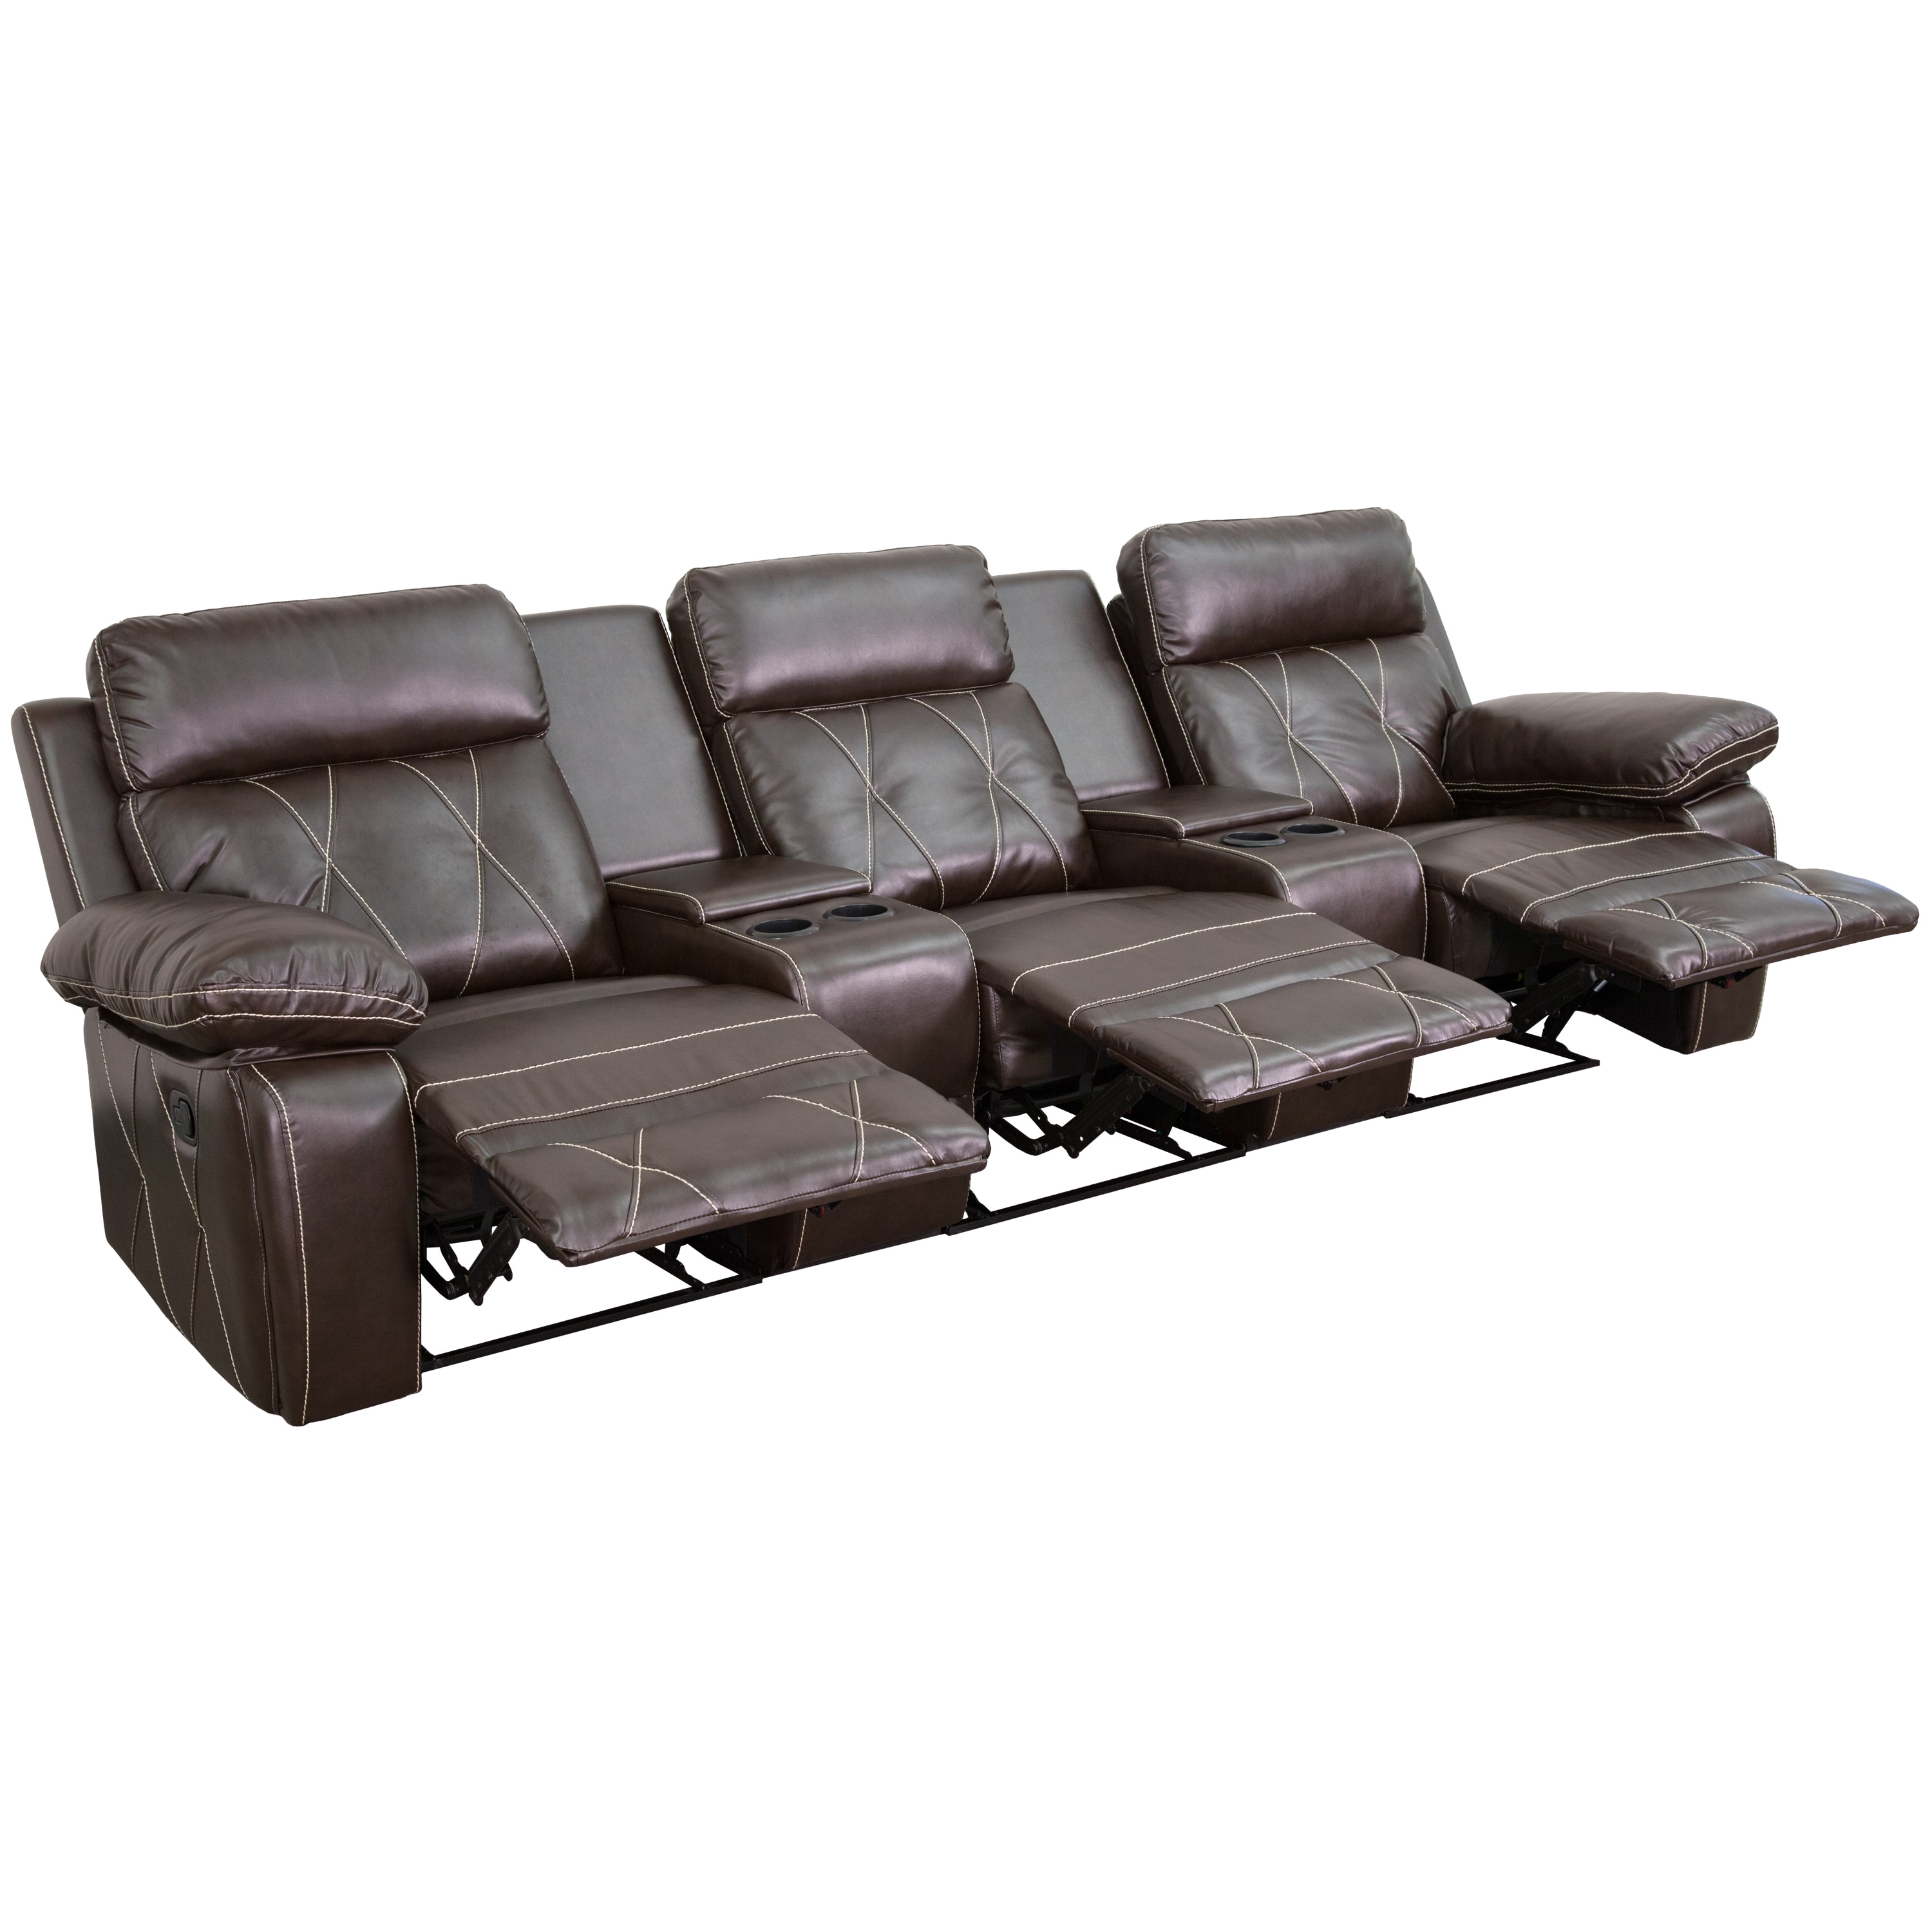 Seater Reclining Sofa In The Couches